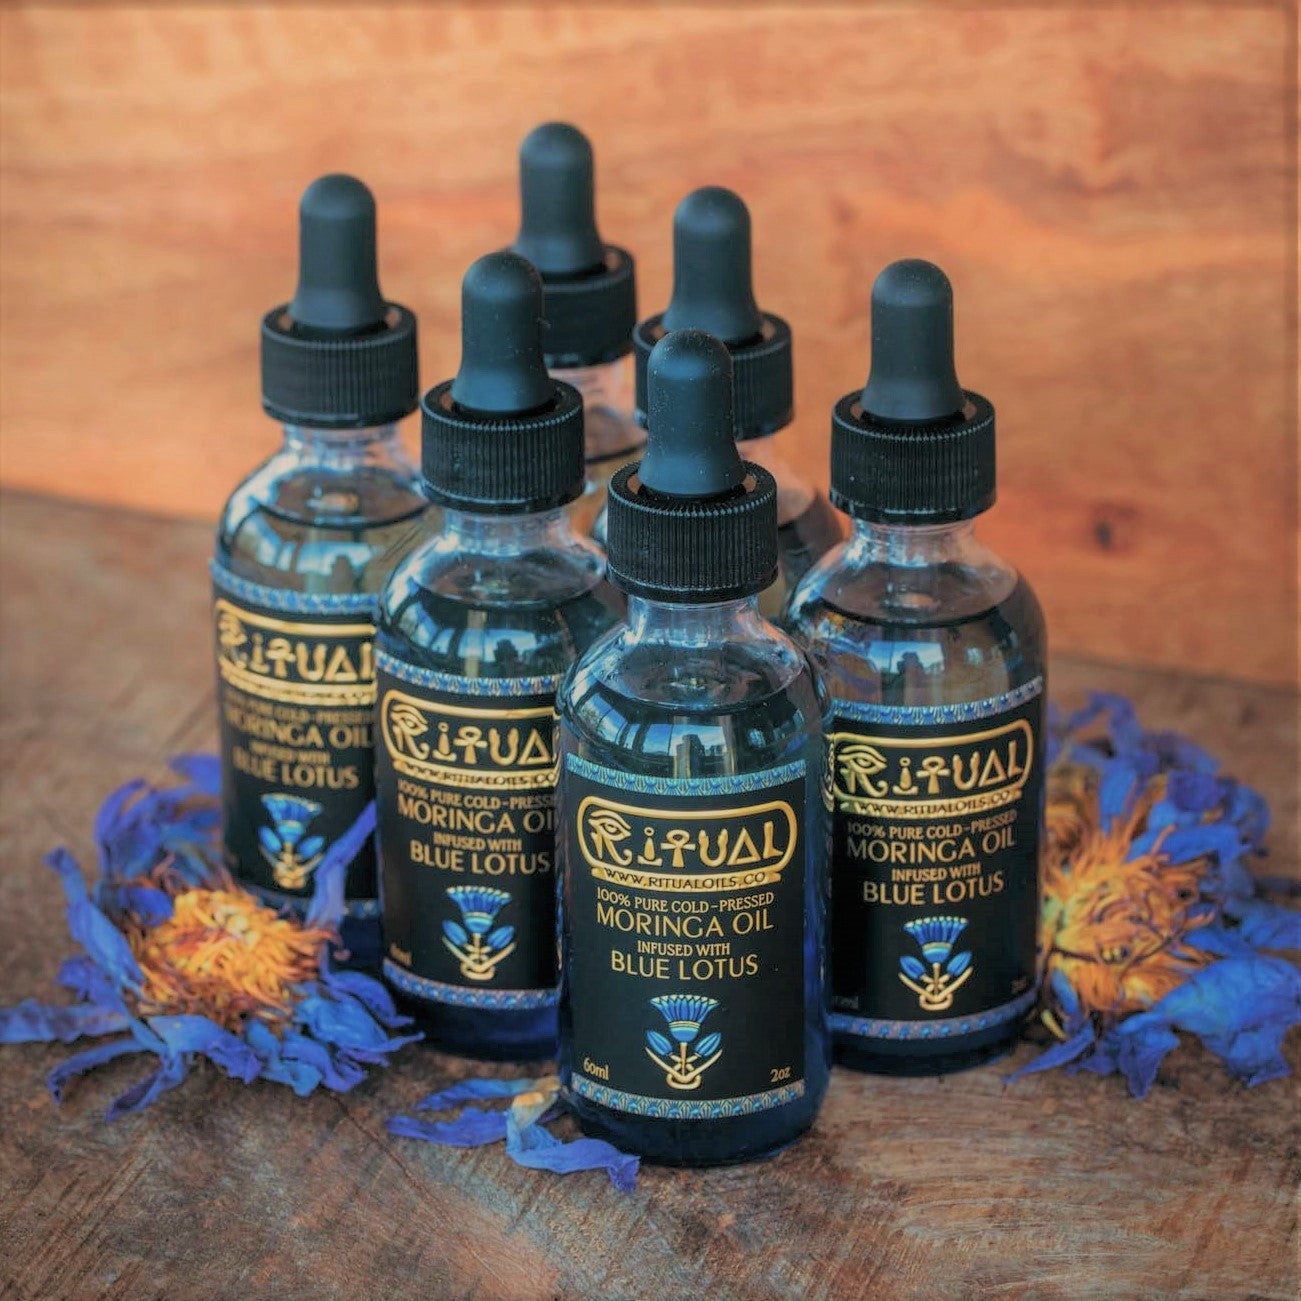 6 Pack of Ritual Oils - Save 20% - Free Shipping Worldwide